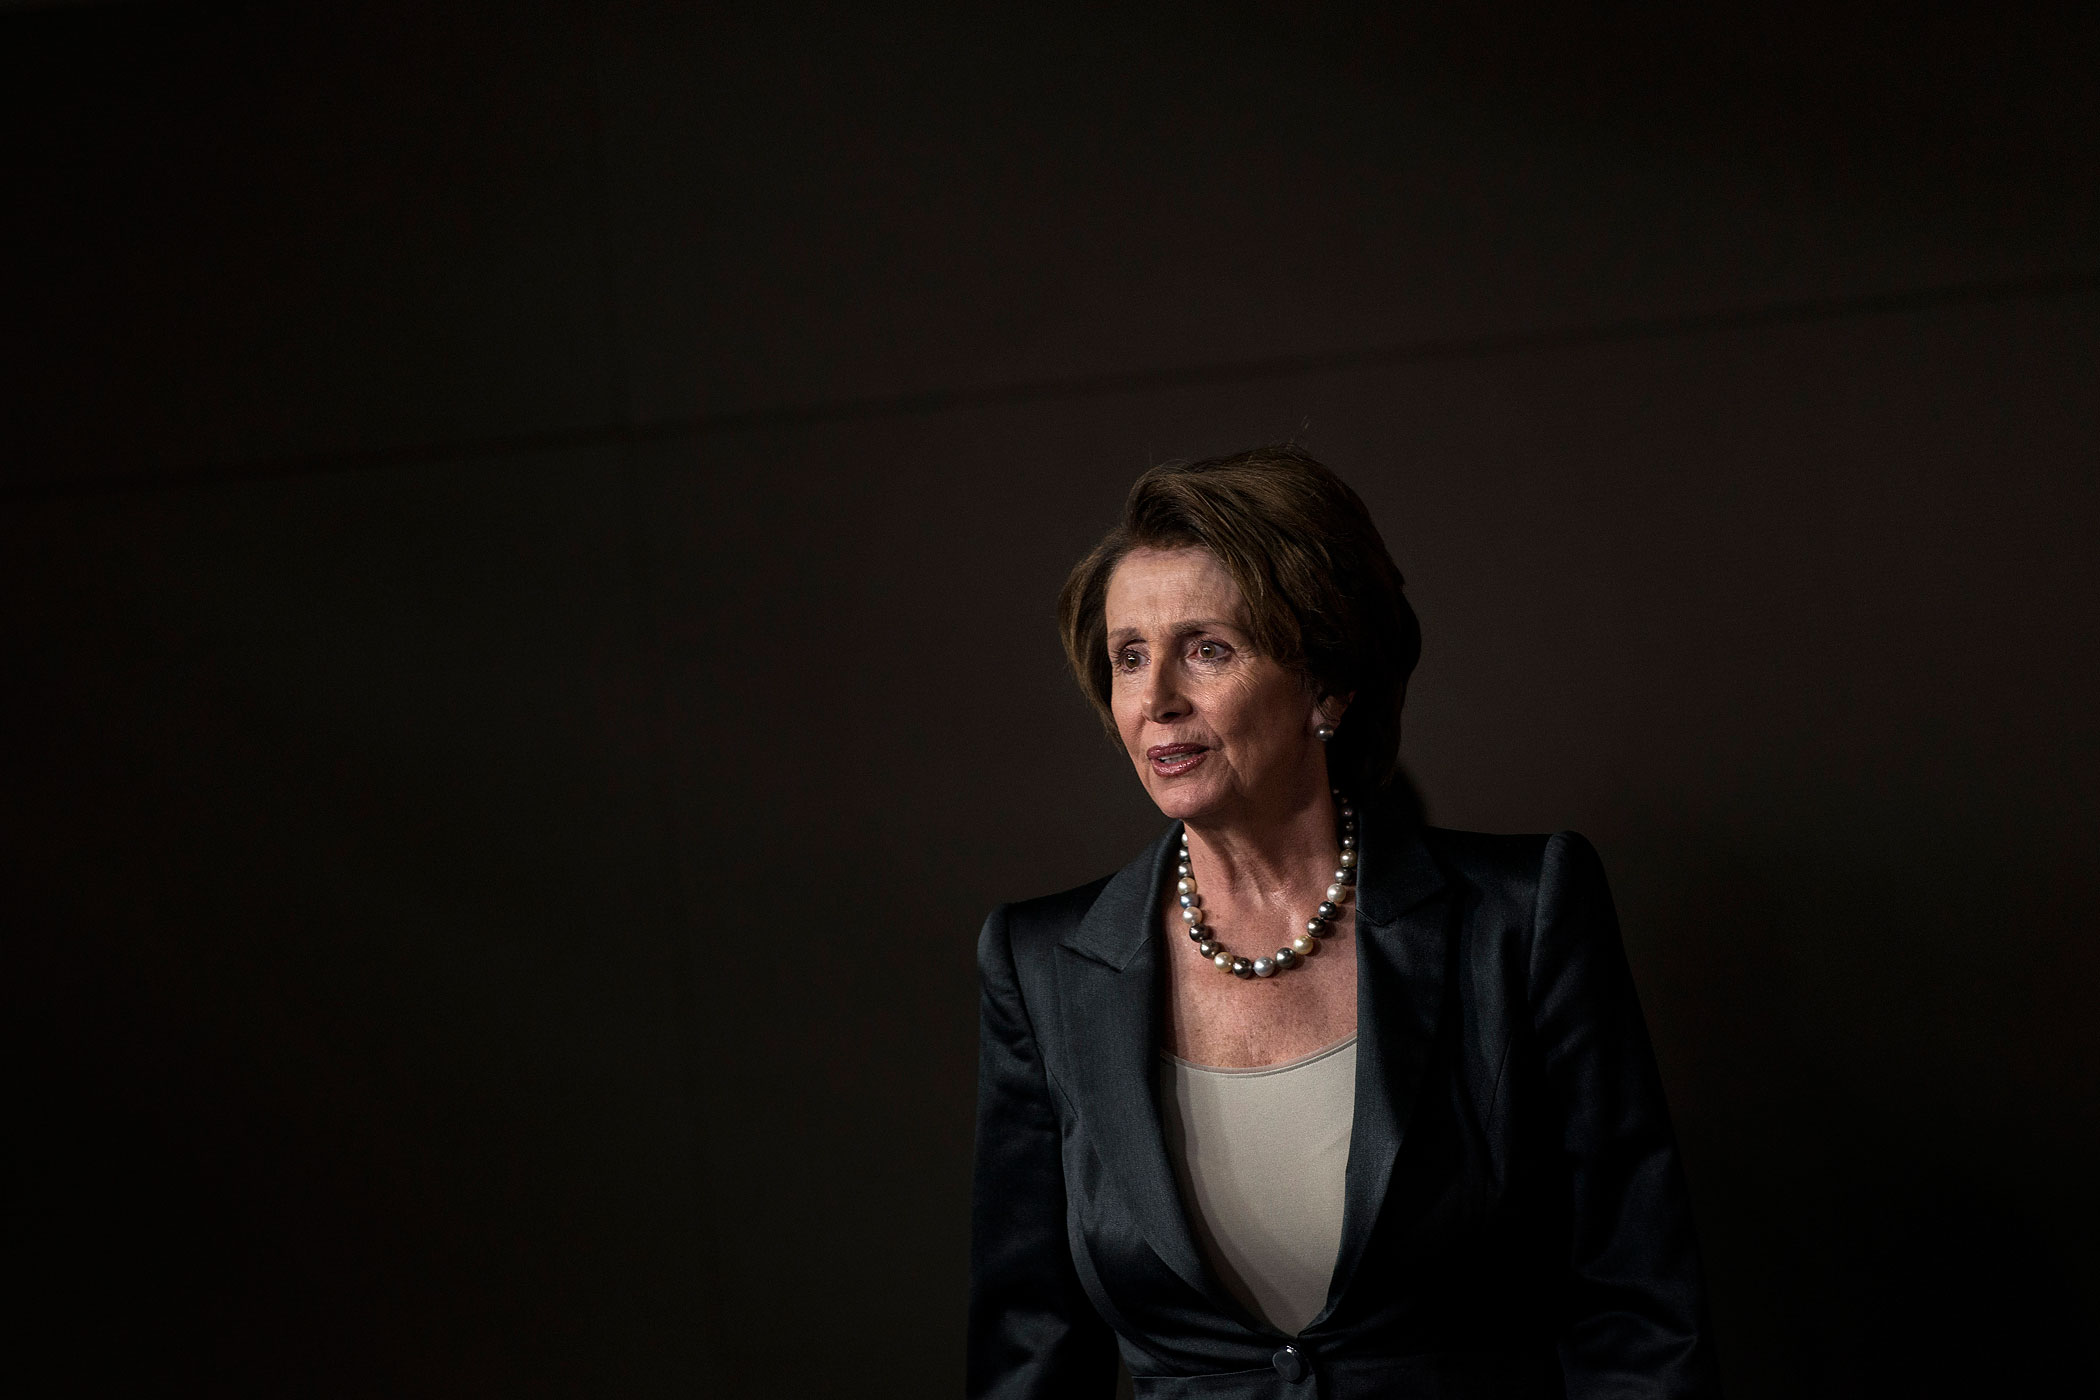 Oct. 3, 2013. House Minority Leader Nancy Pelosi arrives for a weekly press conference on Capitol Hill in Washington. The federal government remains shutdown after lawmakers failed to pass a spending bill.